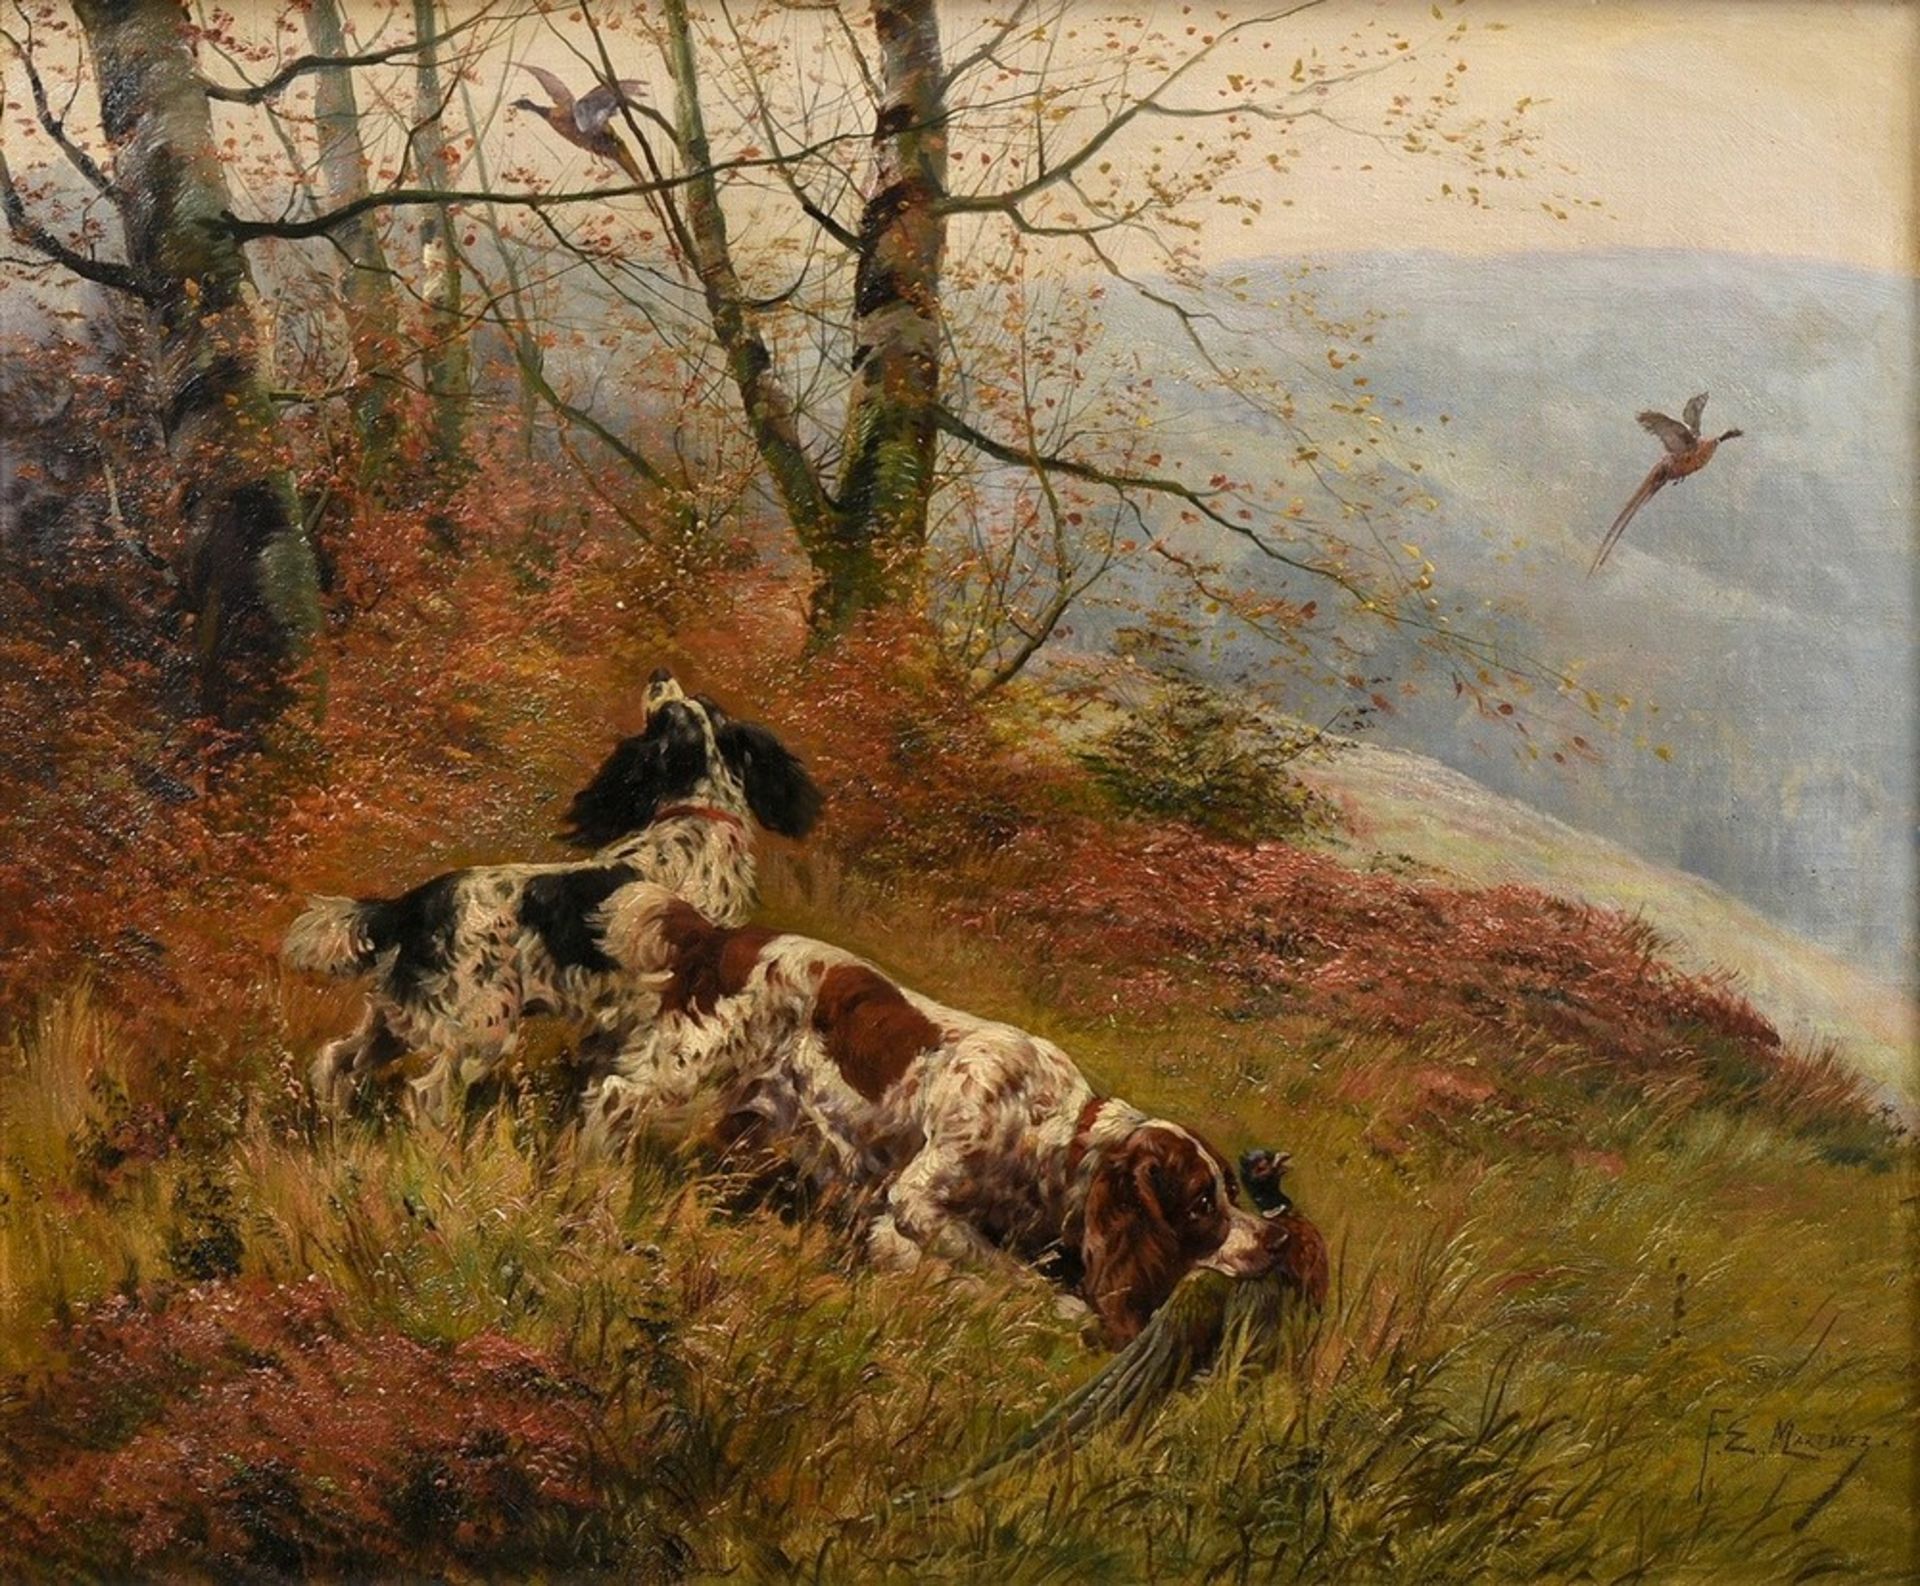 Martinez, F.E. (19th c.) "Hunting dogs retrieving a pheasant", oil/canvas, lower right sign., Dutch